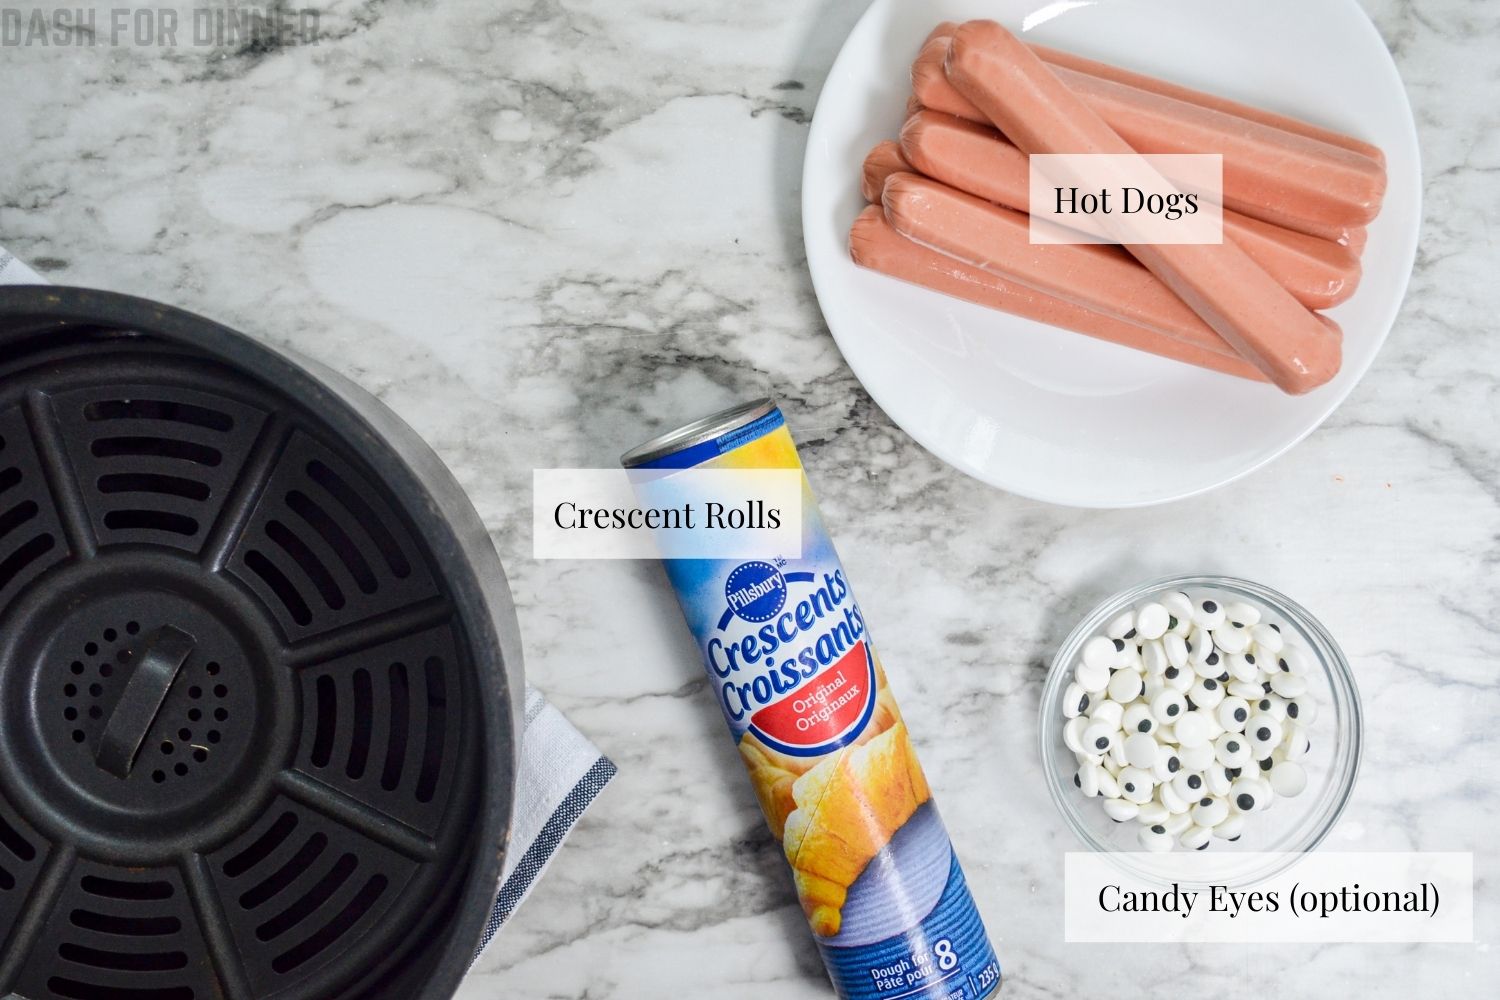 The ingredients needed to make mummy dogs in the Air Fryer: hot dogs, crescent rolls, and candy eyes.